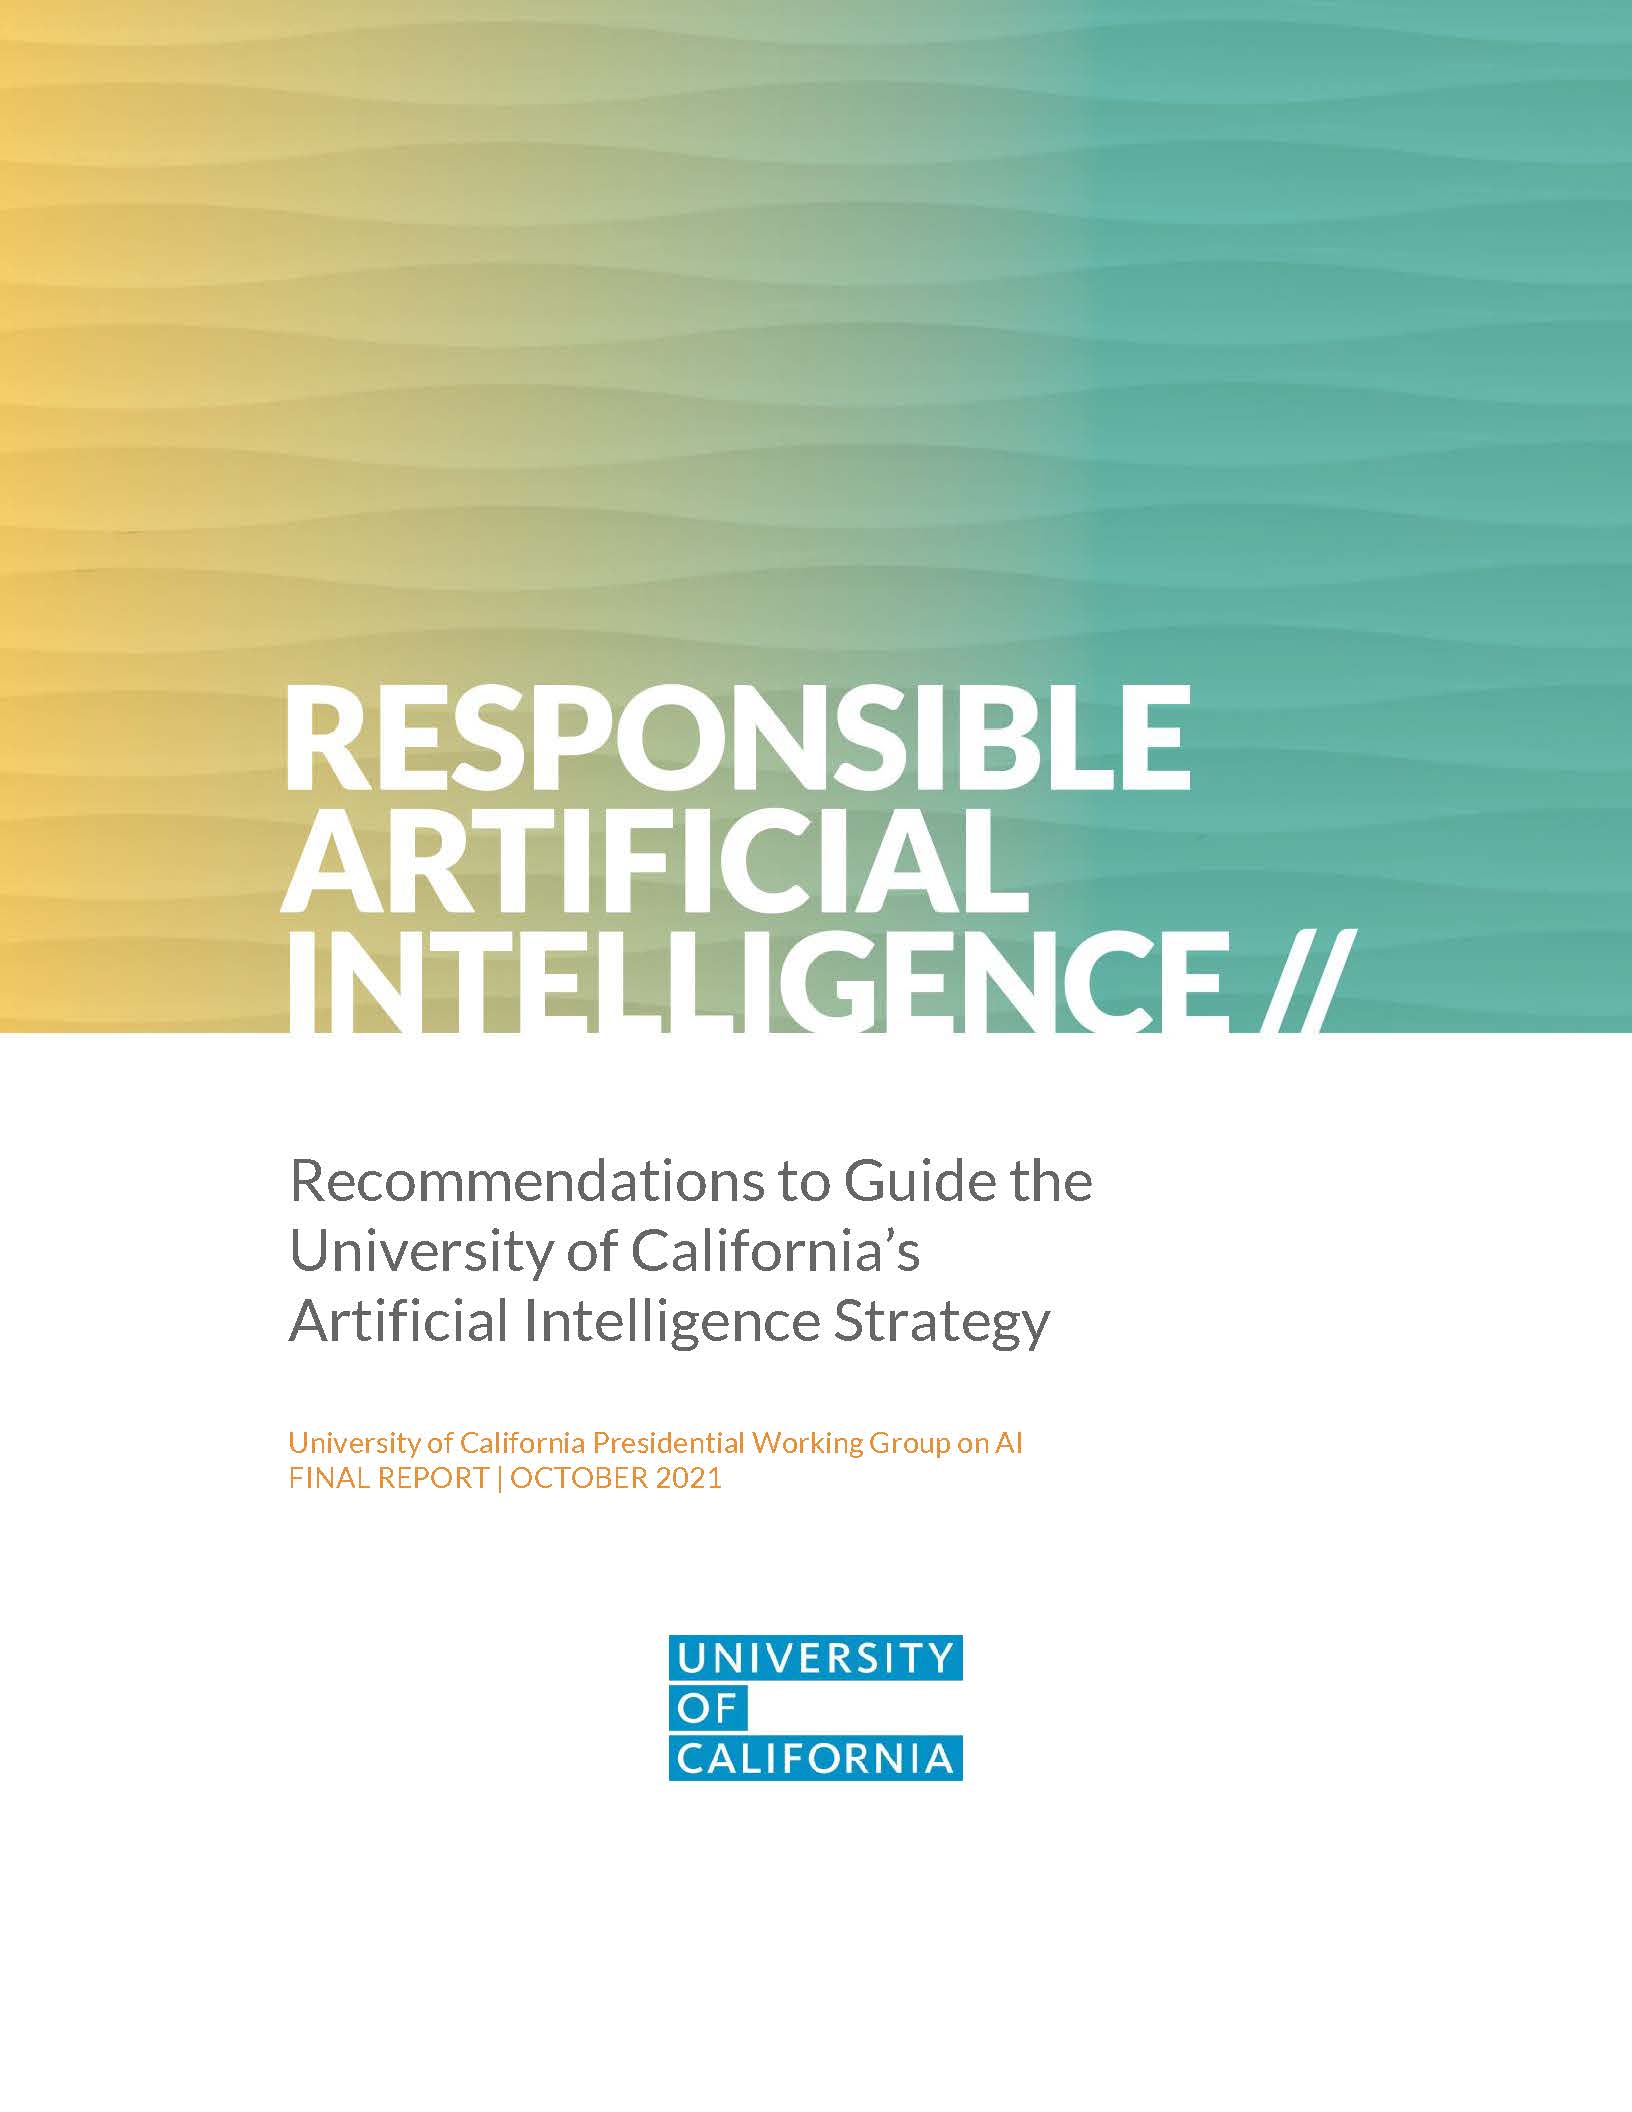 Pages from Responsible Artificial Intelligence- Recommendations to Guide the University of California’s Artificial Intelligence Strategy